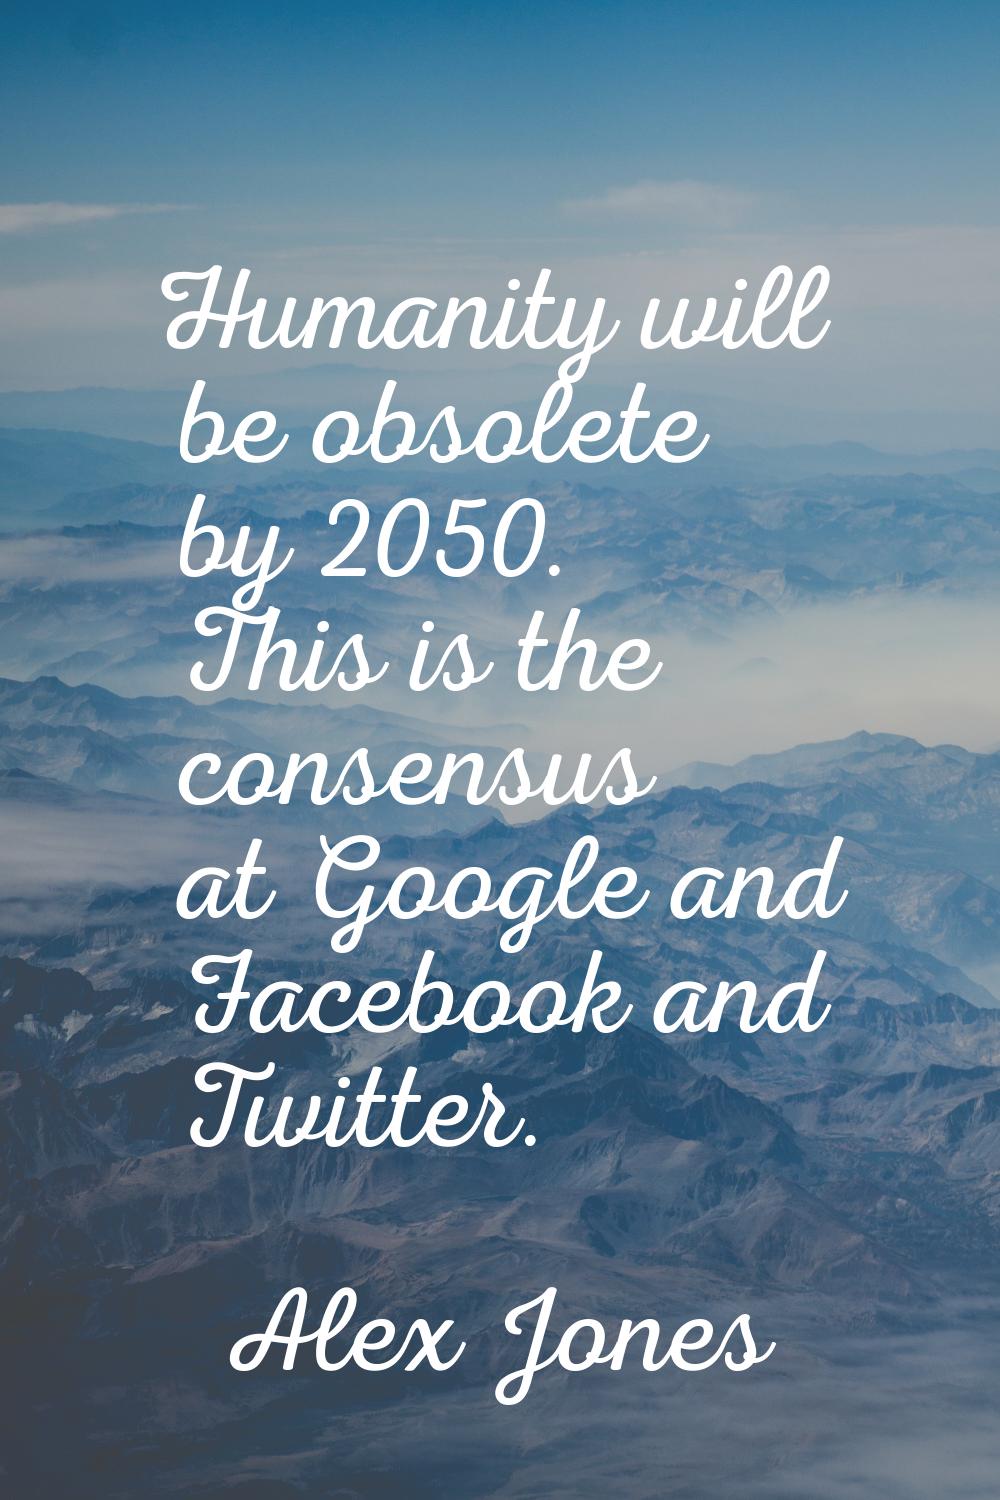 Humanity will be obsolete by 2050. This is the consensus at Google and Facebook and Twitter.